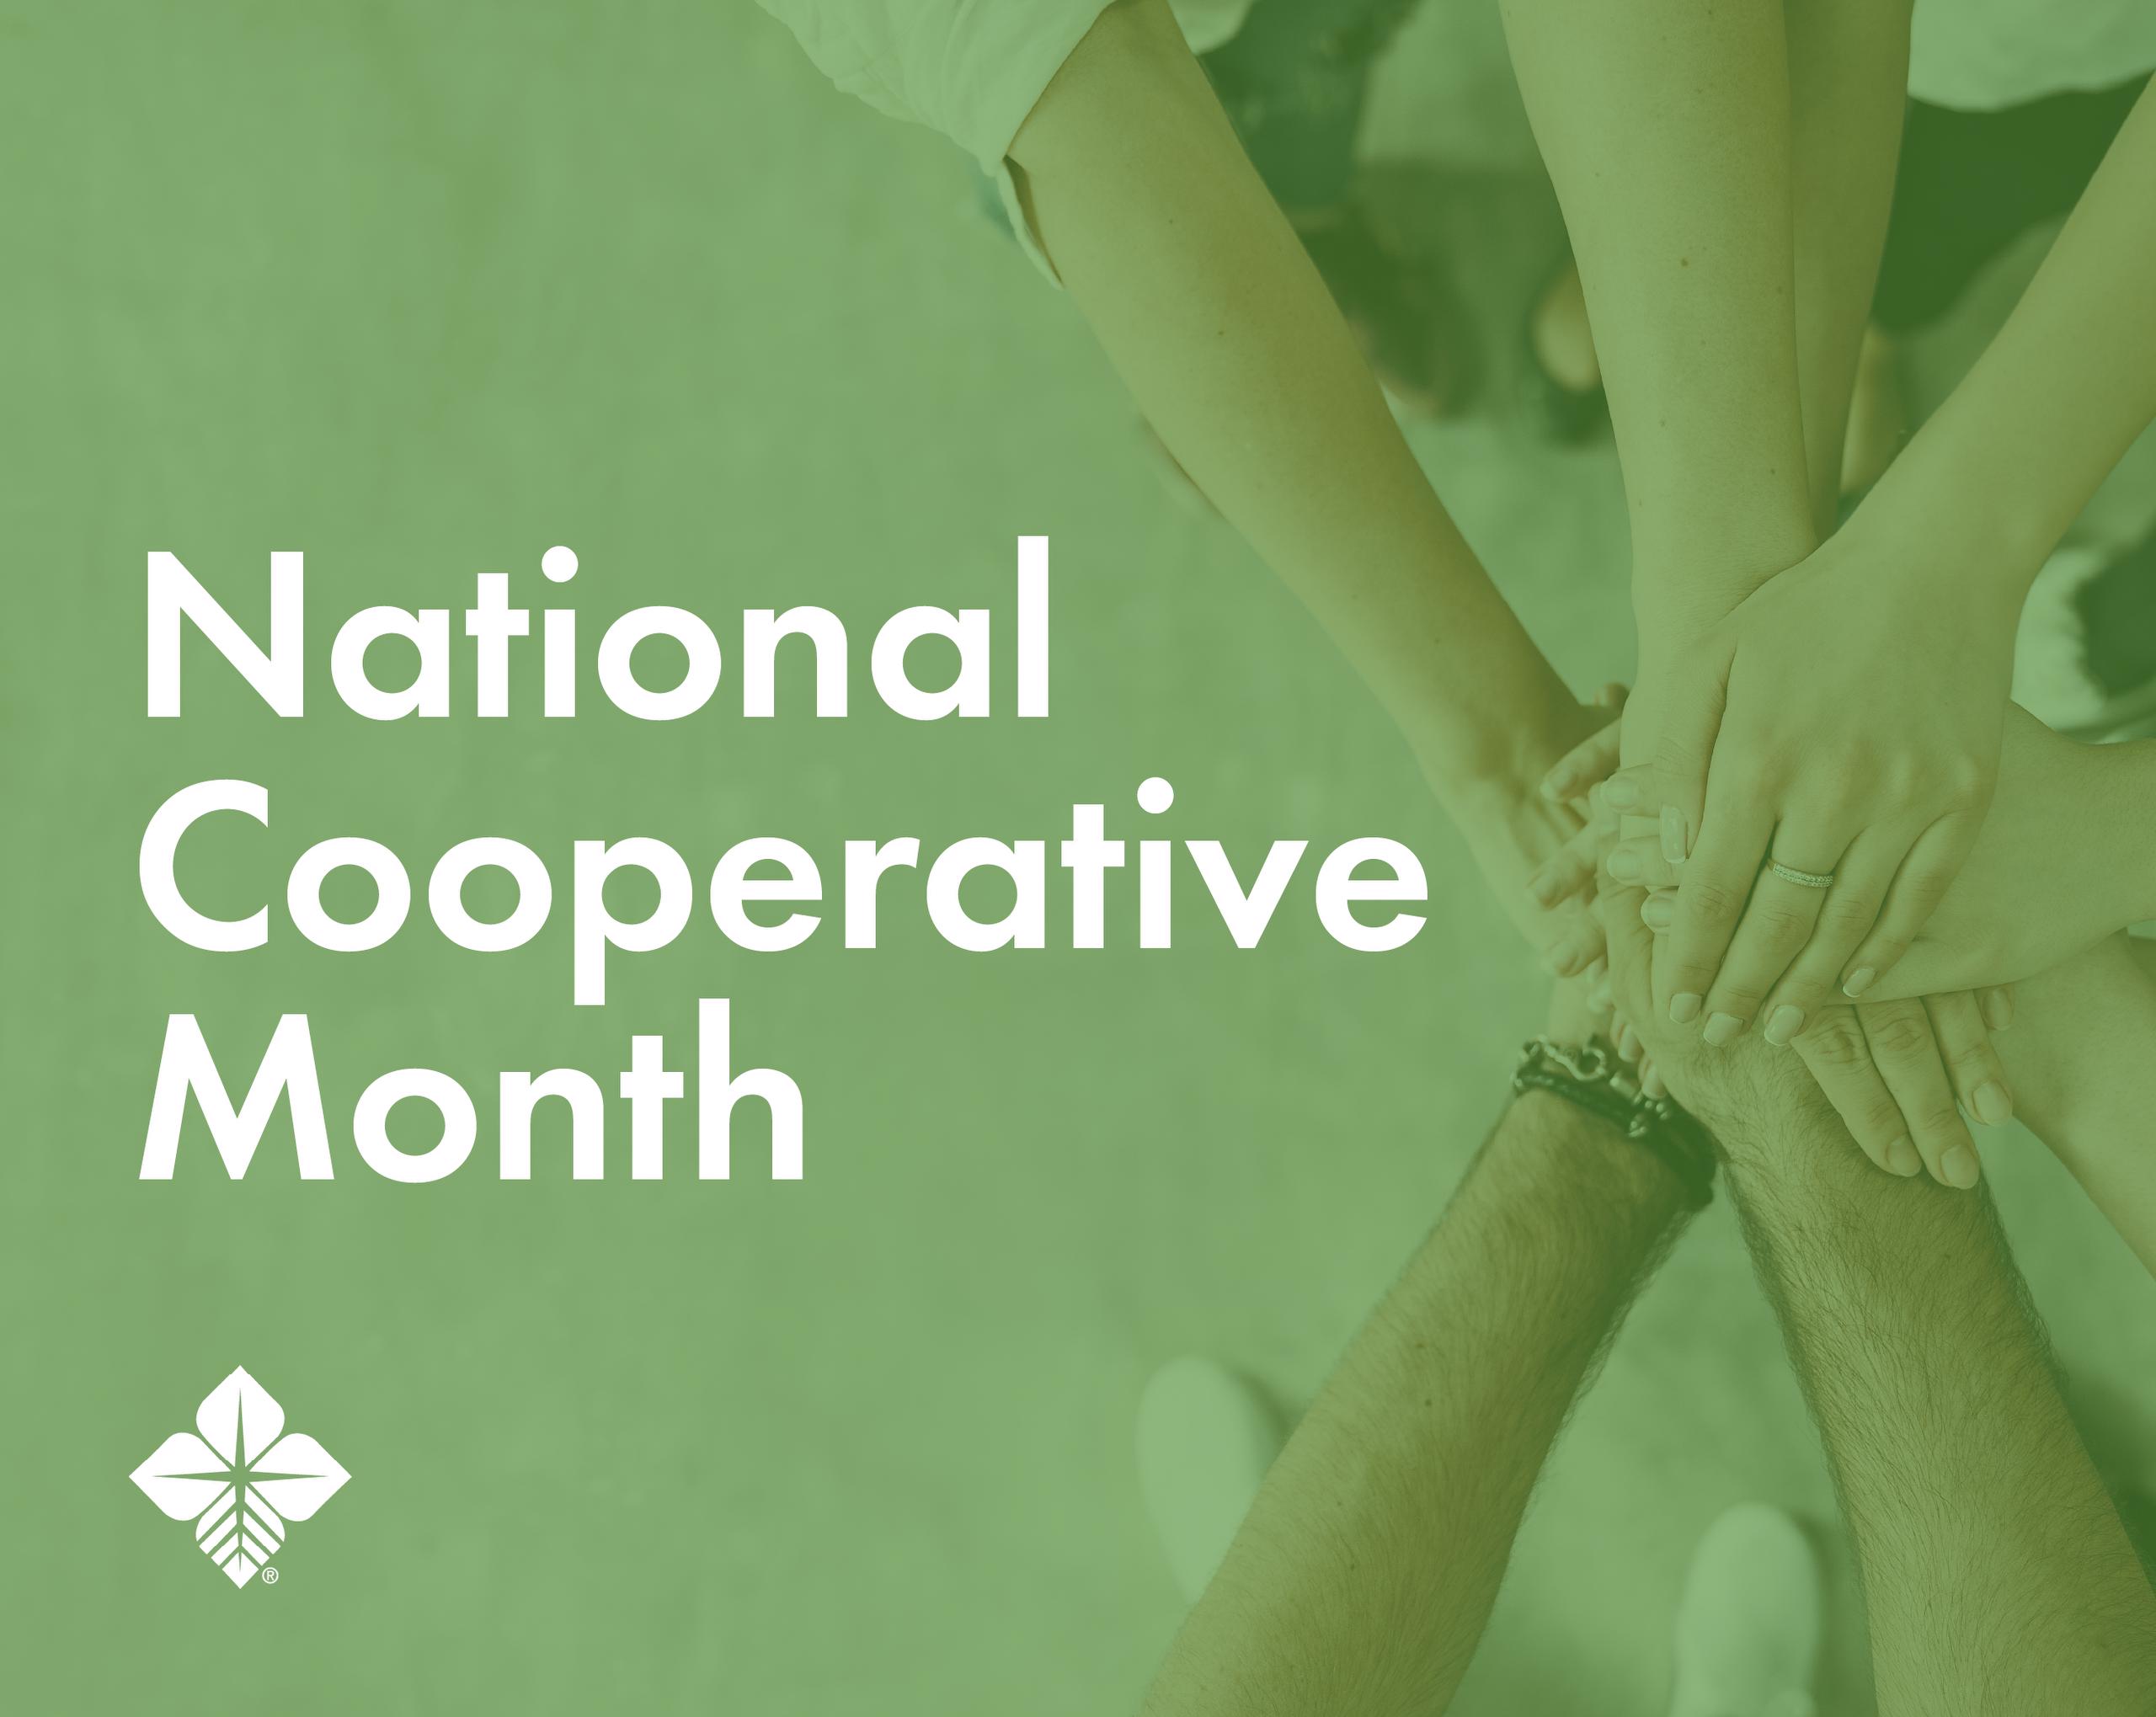 Text reads, "National Cooperative Month" with biostar logo underneath. Photo is hands all meeting in middle with green overlay.